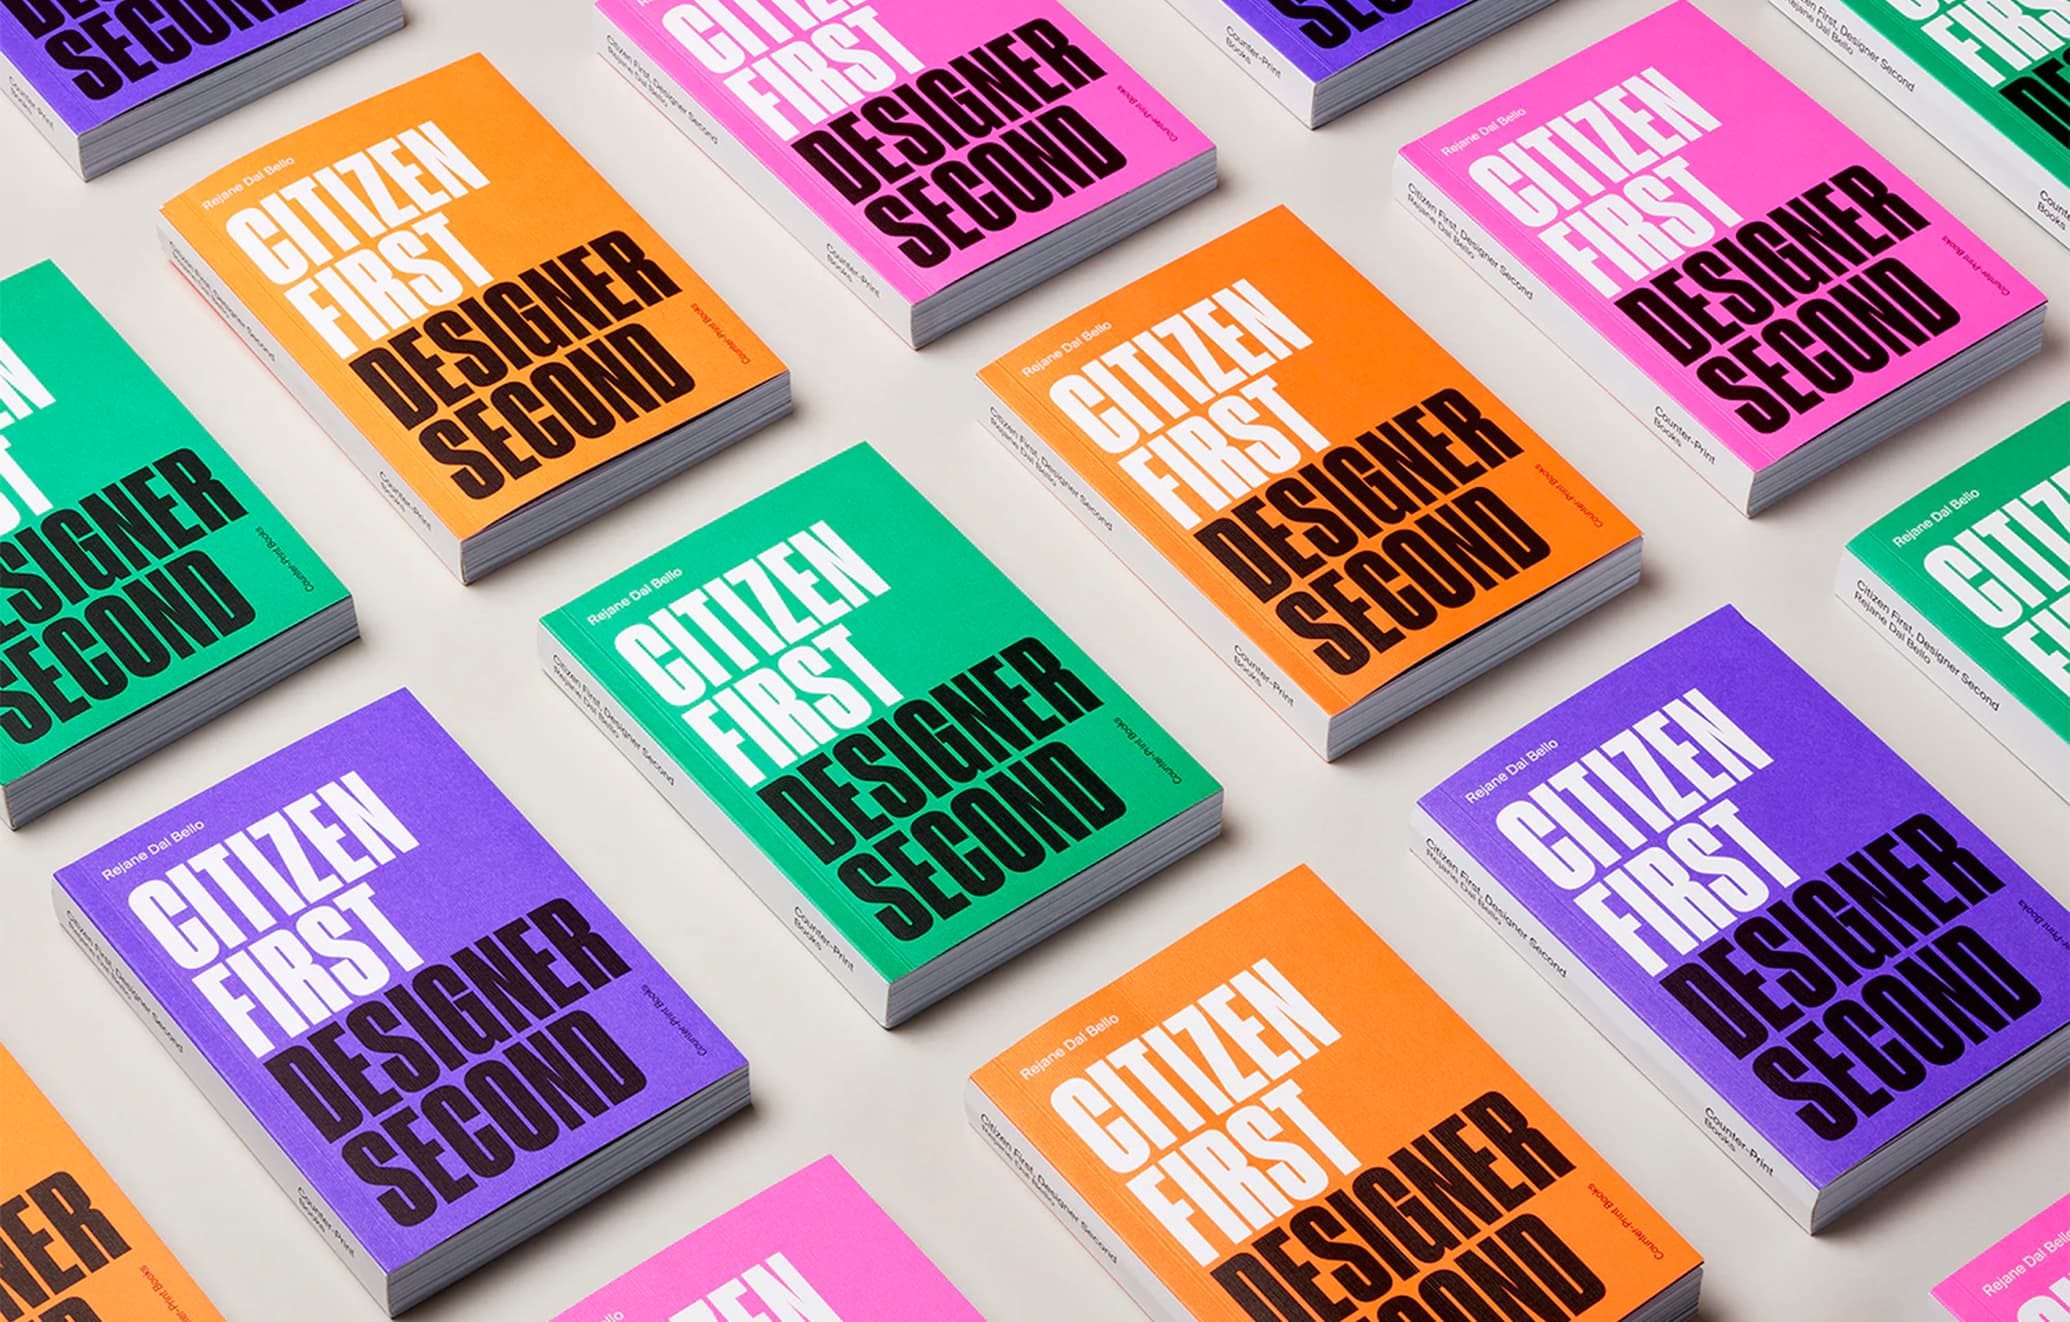 A diagonal grid of copies of the book "Citizen First, Designer Second" that shows off how its cover is printed in different colors: green, orange, pink, purple